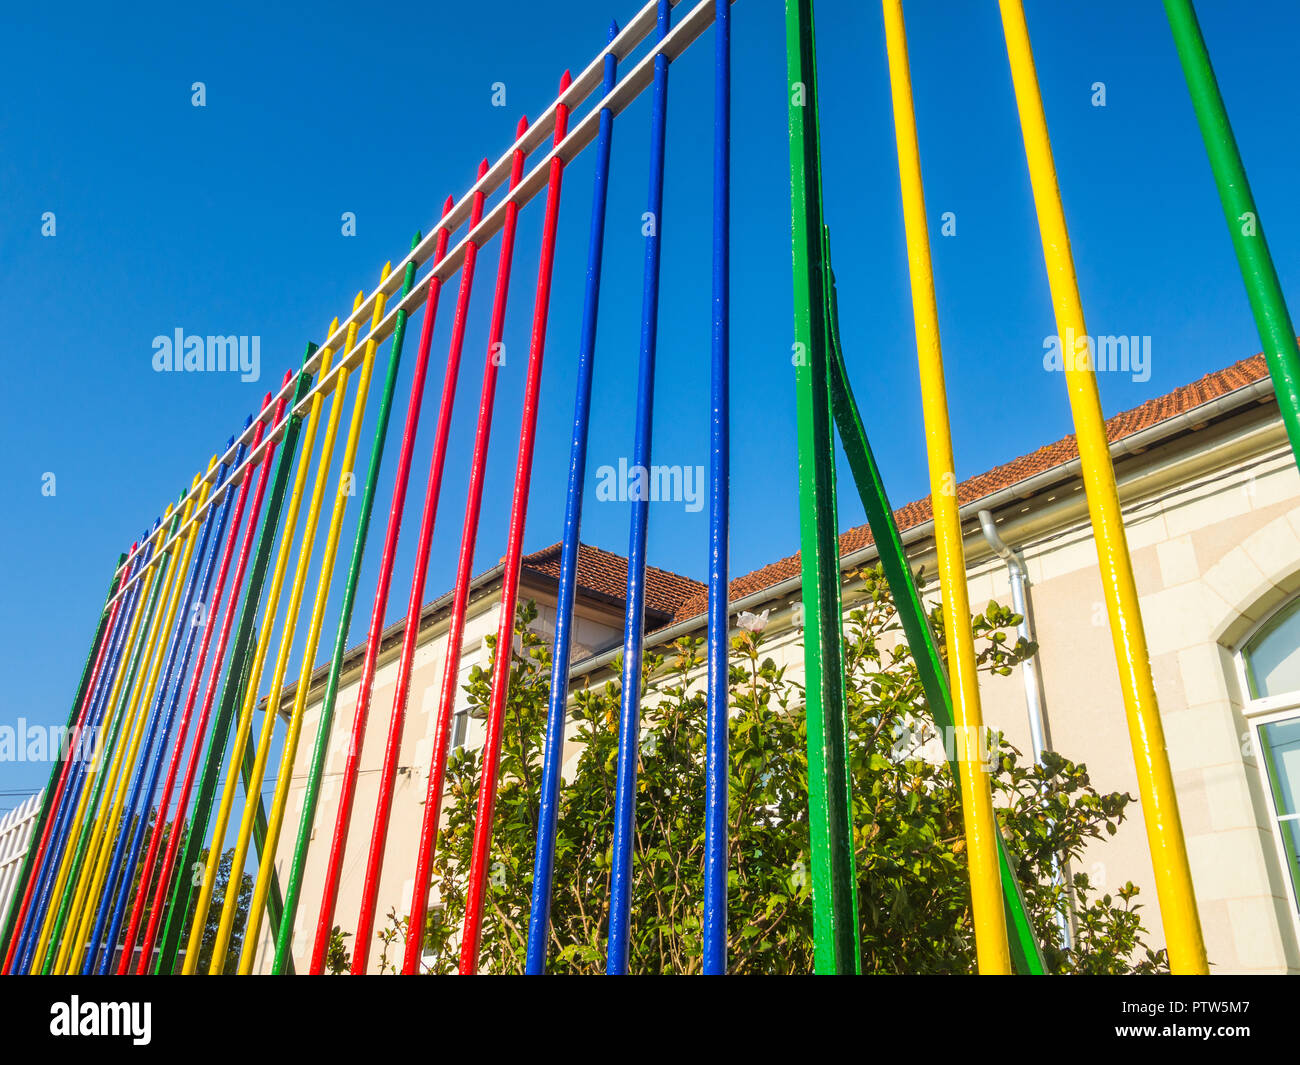 Painted fencing outside French primary school. Stock Photo